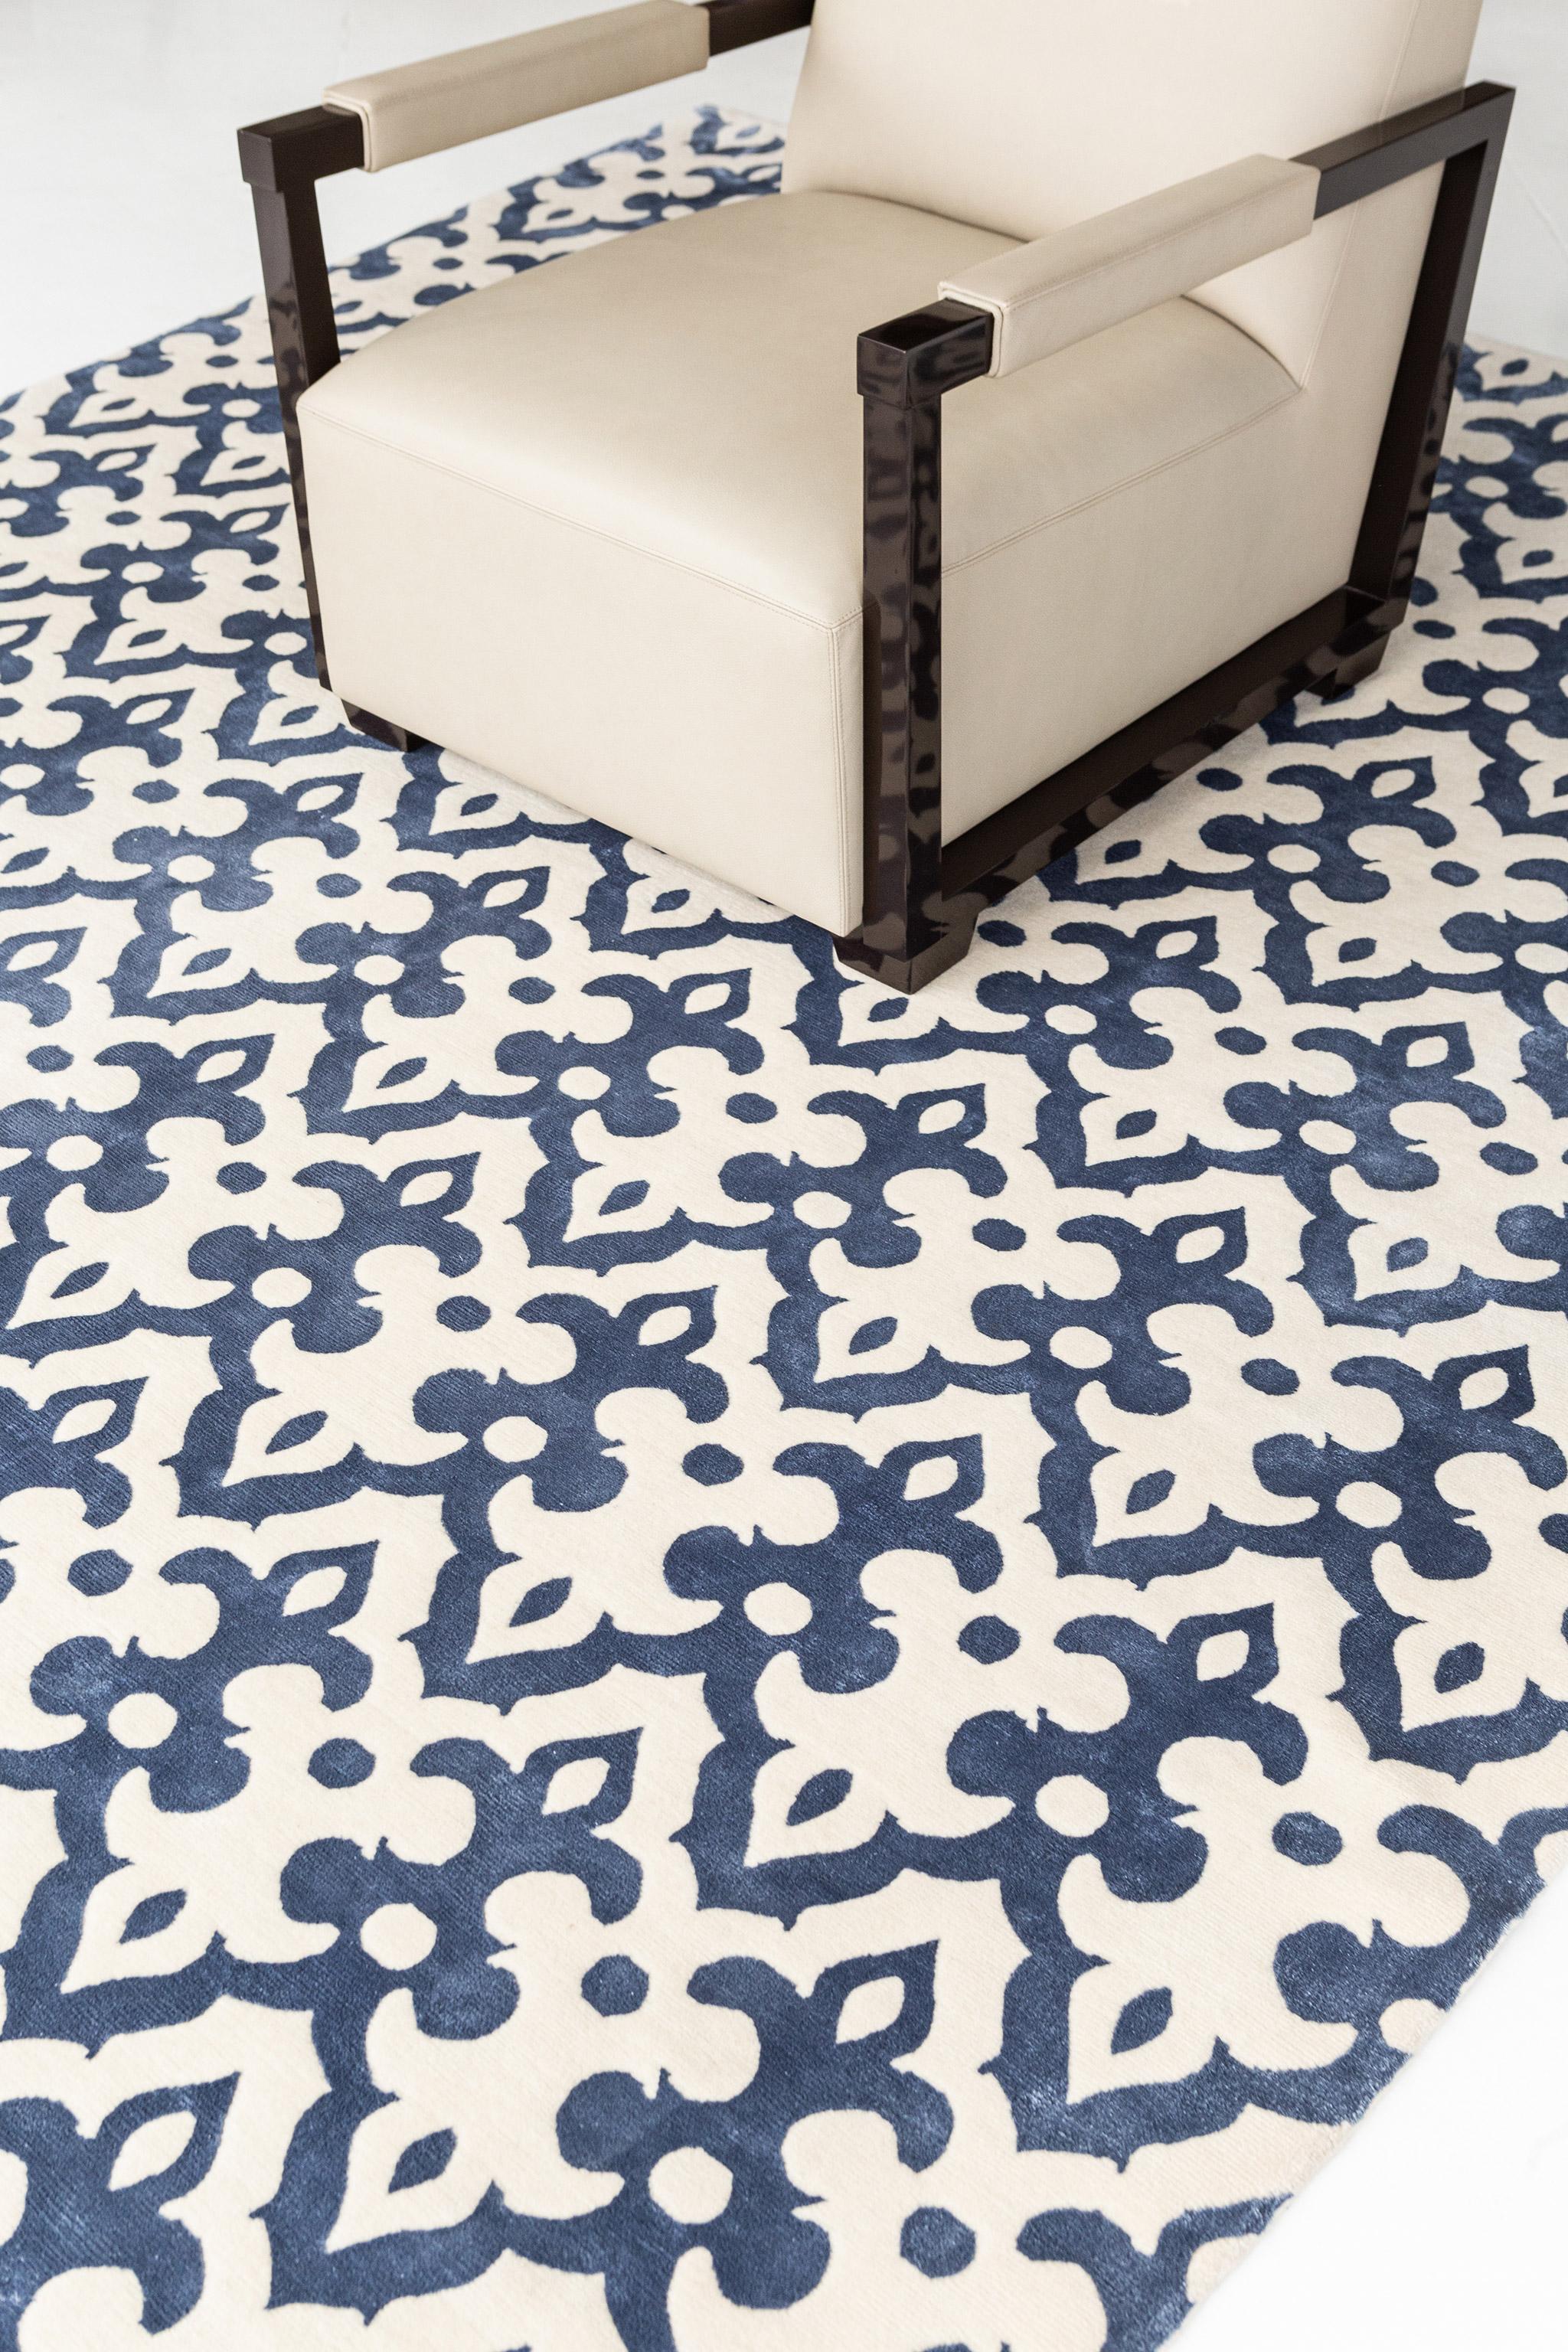 This Transitional Design rug Moresco’ is sophisticated and subtle without sacrificing elegance. It features an all-over repetitive ornate pattern laying on the indigo field. With its subtle and airy colour palette, this transitional area rug can